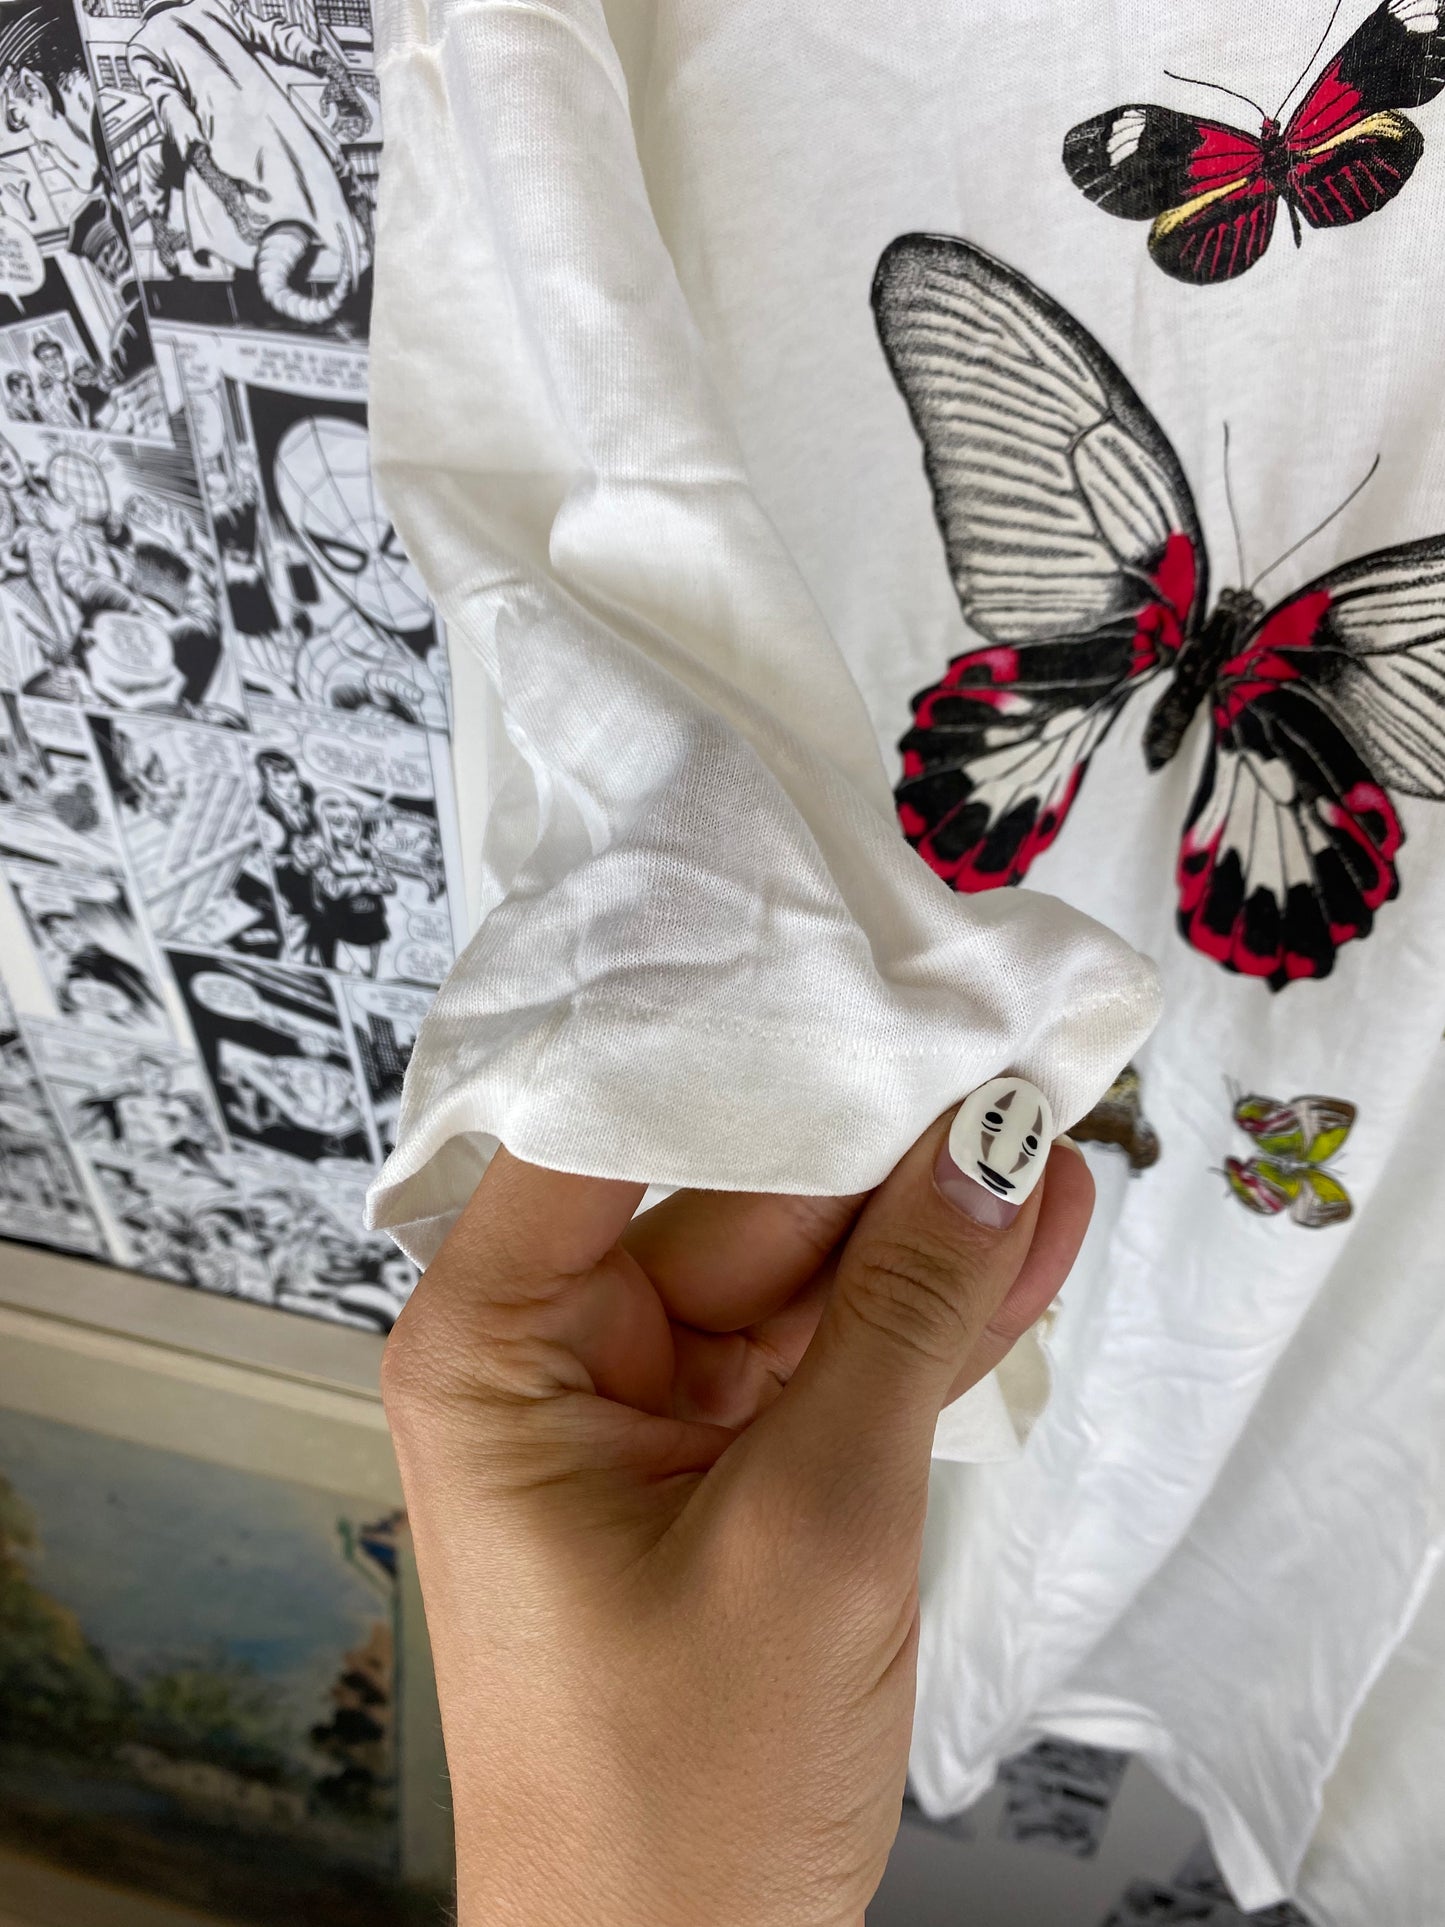 Vintage Butterfly Harlequin 80s t-shirt - size XL